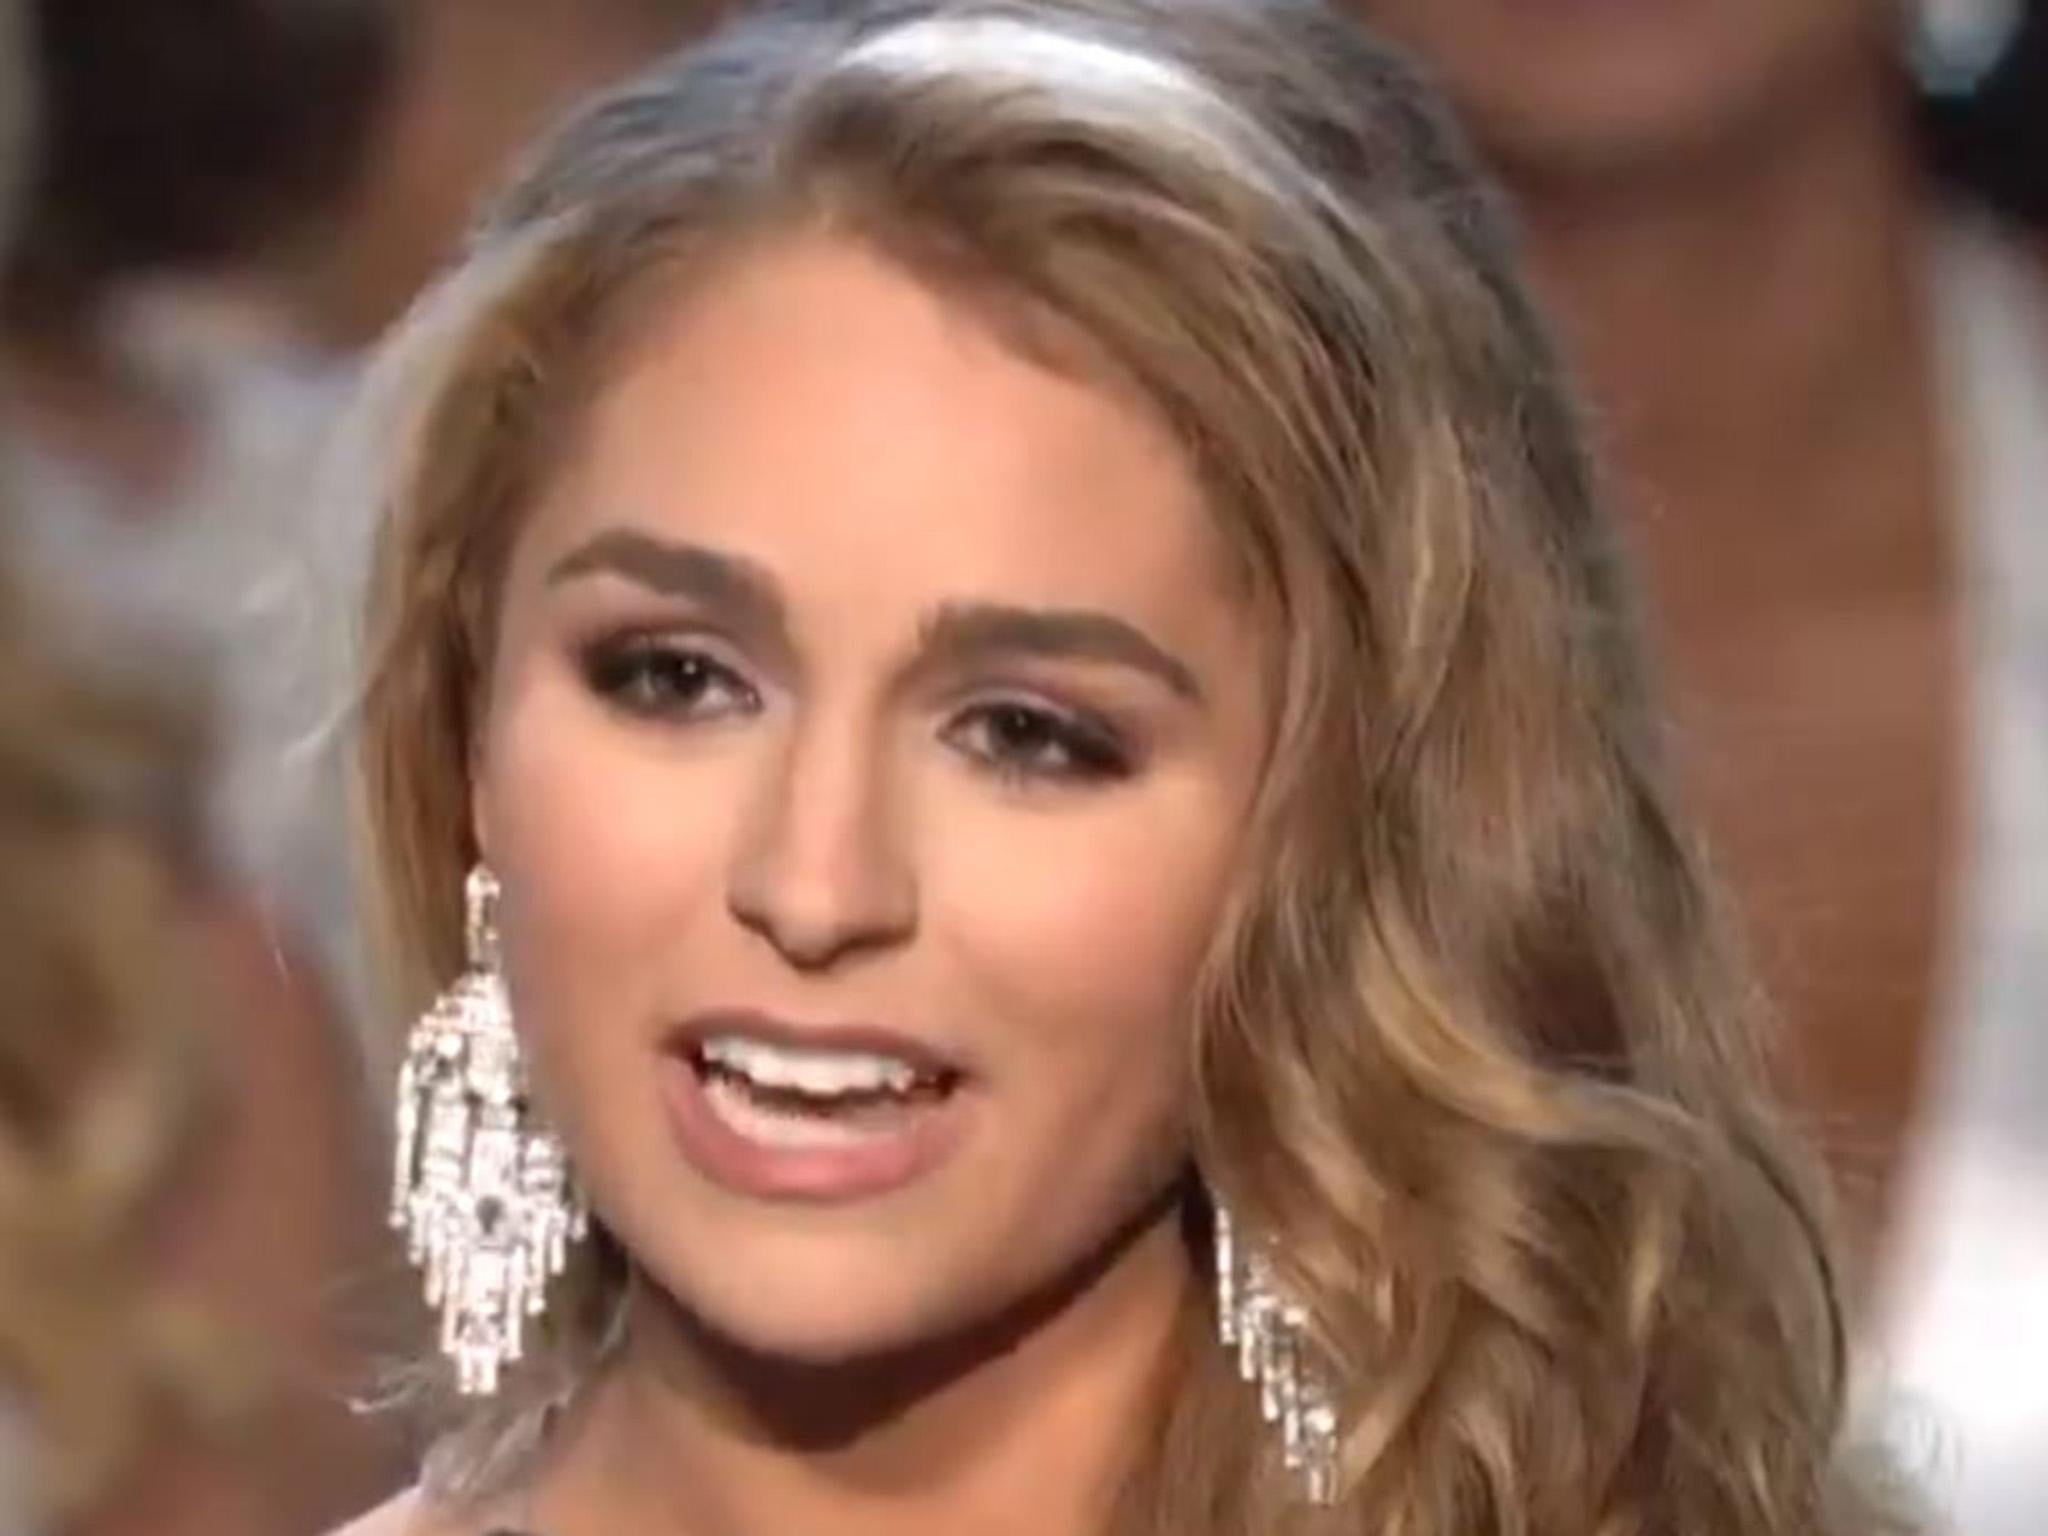 Miss Texas doesn't hold back when judge asks her about Trump's